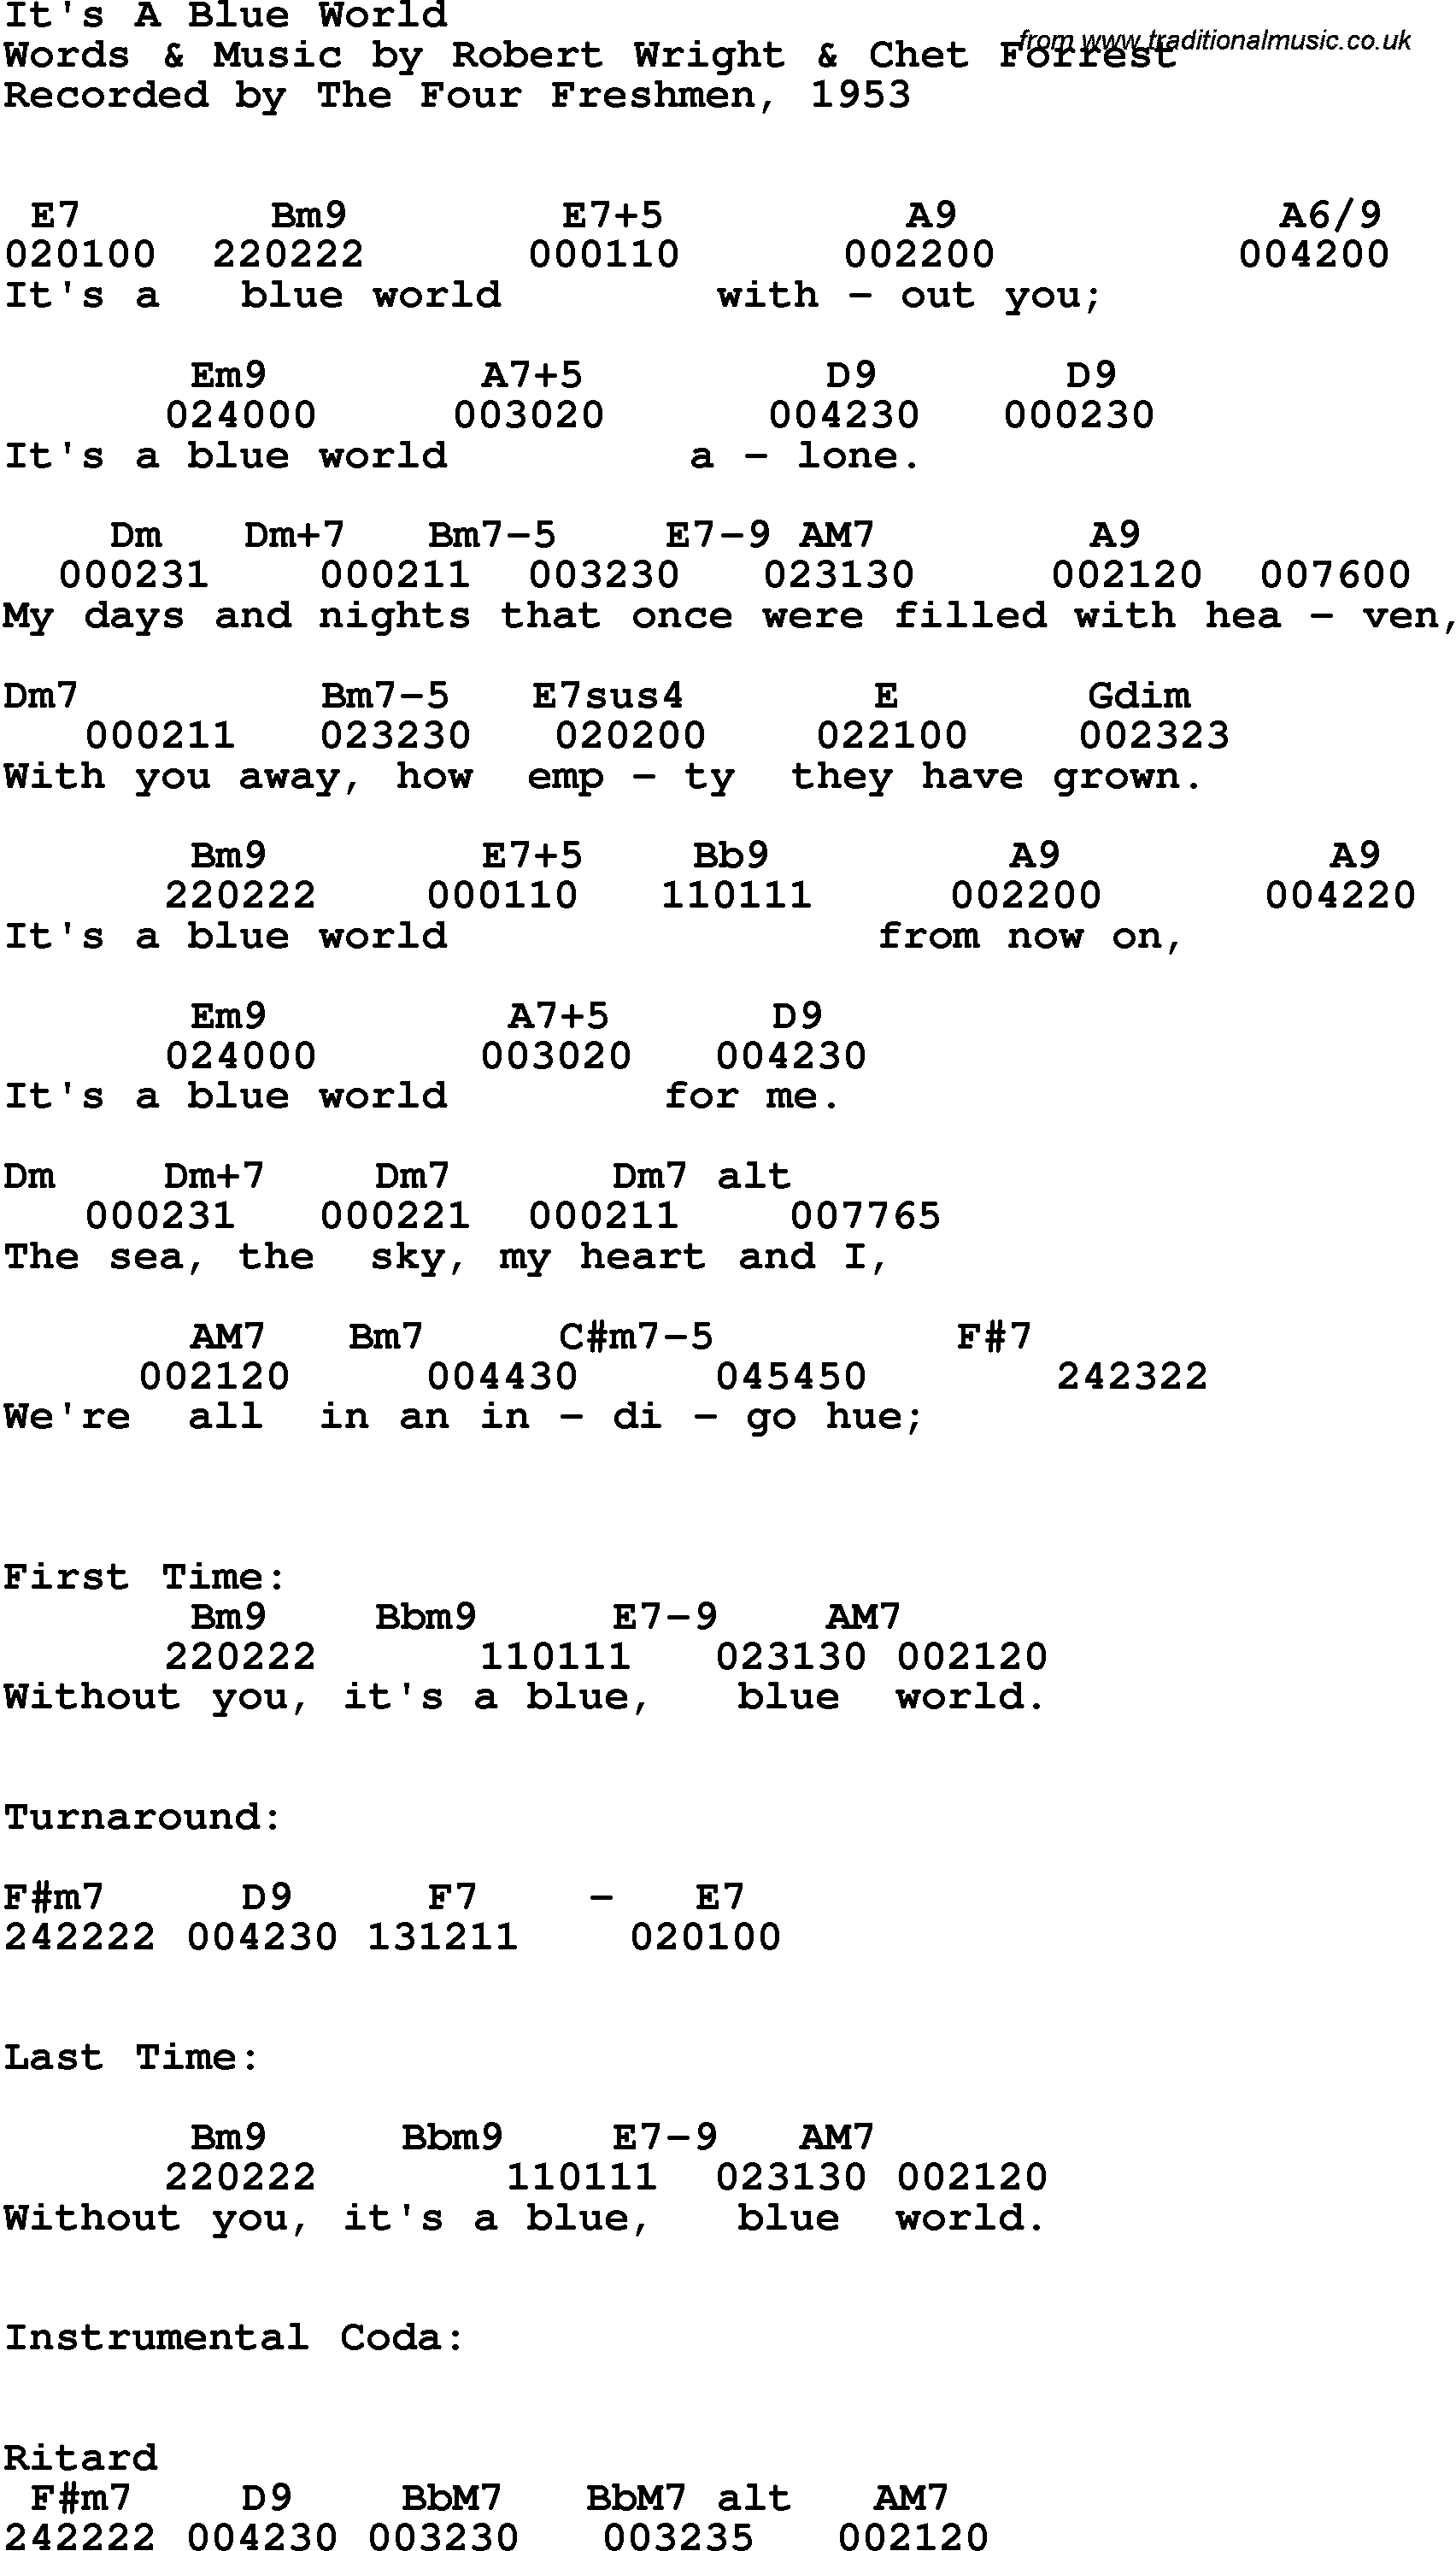 Song Lyrics with guitar chords for It's A Blue World - The Four Freshmen, 1953